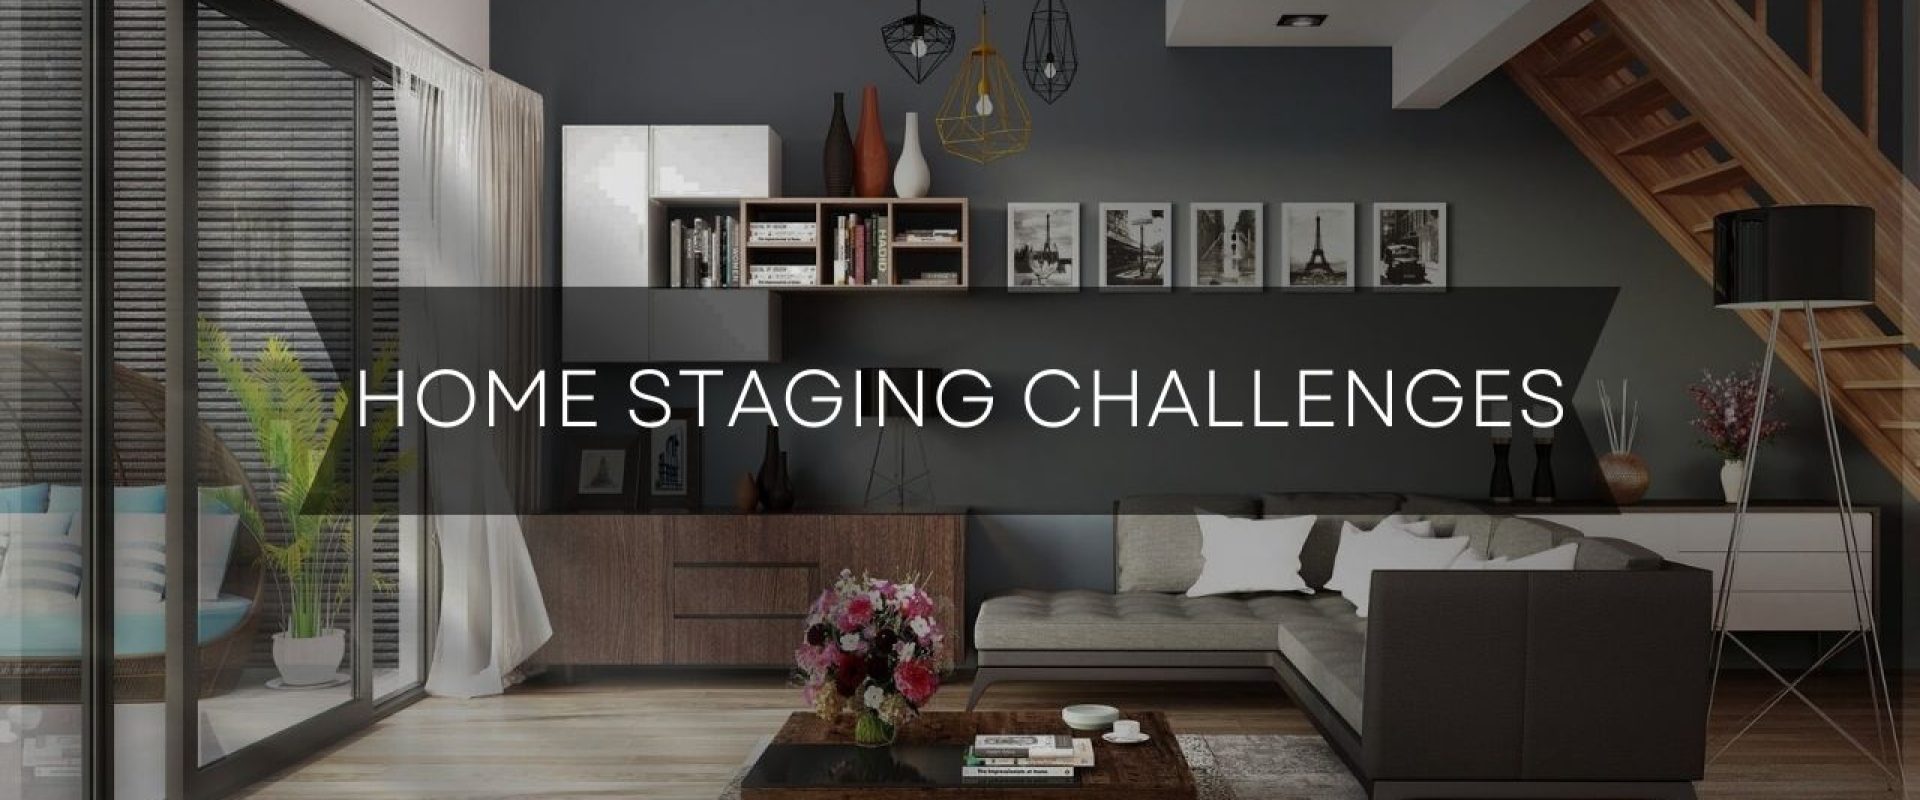 Home Staging Challenges